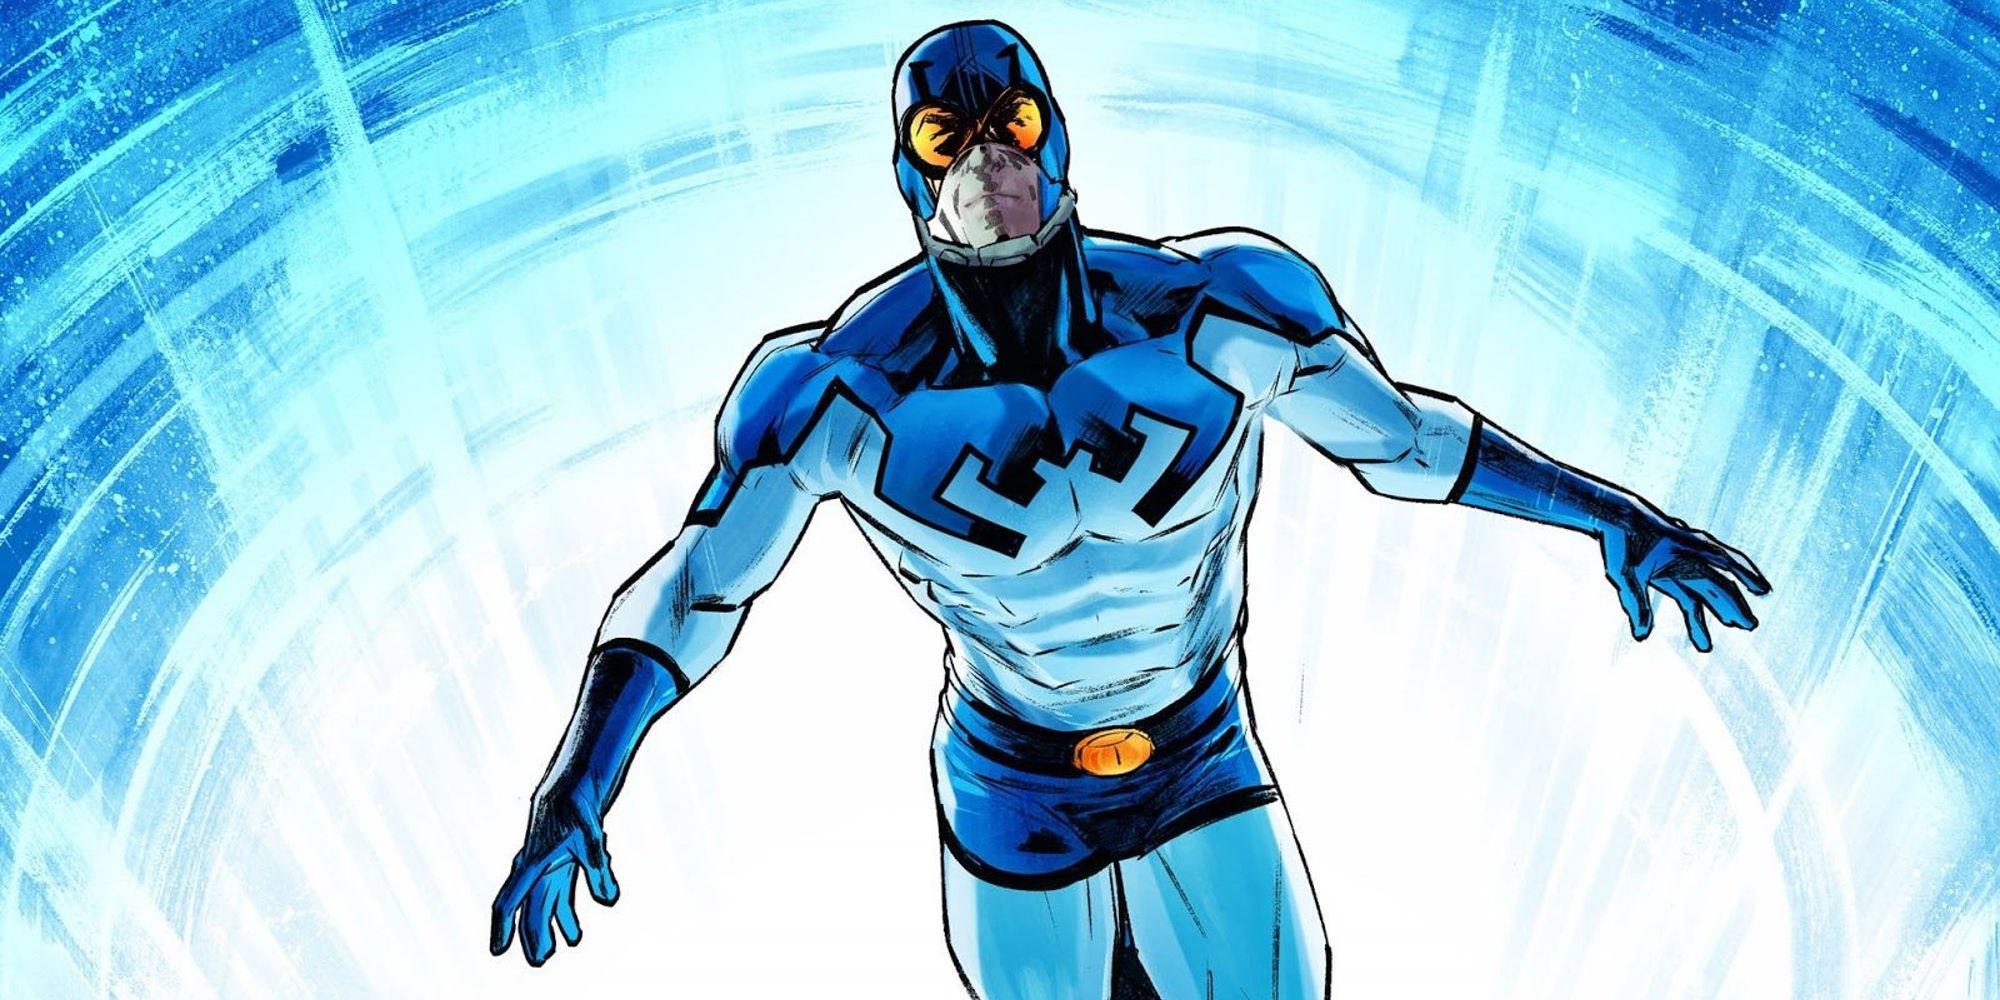 Ted Kord as the second Blue Beetle in Injustice comics